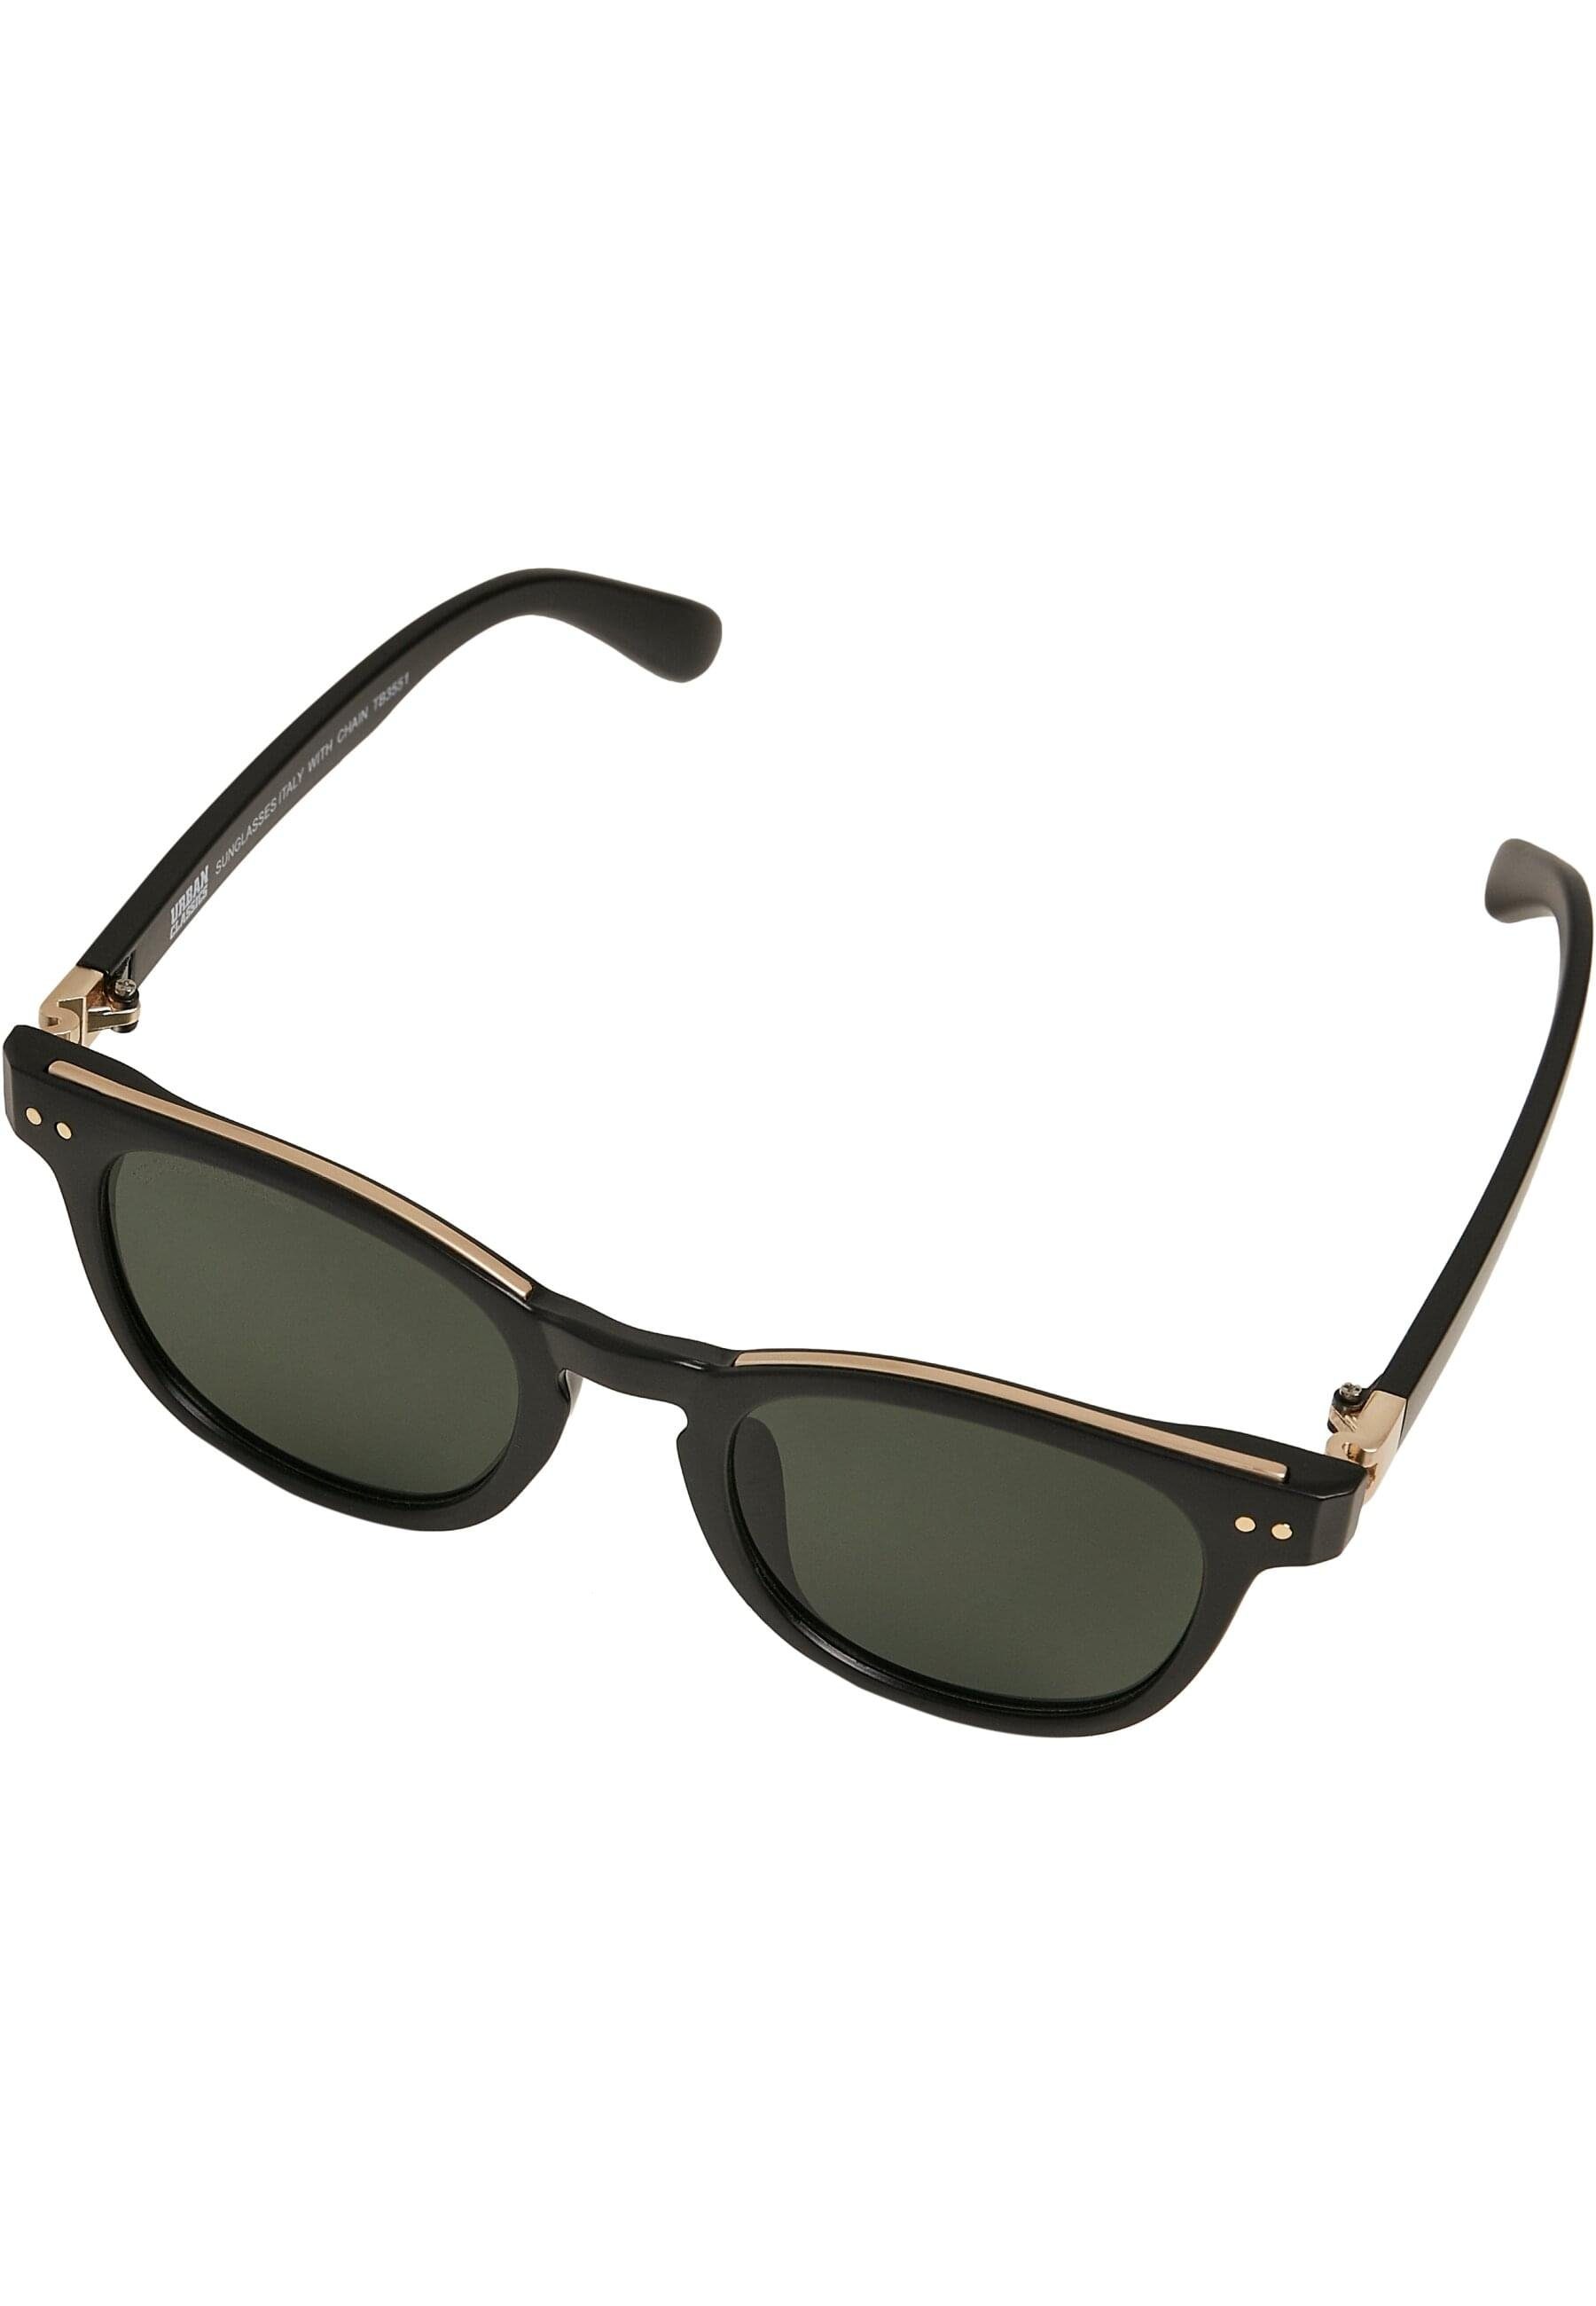 Sonnenbrille Unisex Italy URBAN CLASSICS Sunglasses with black/gold/gold chain